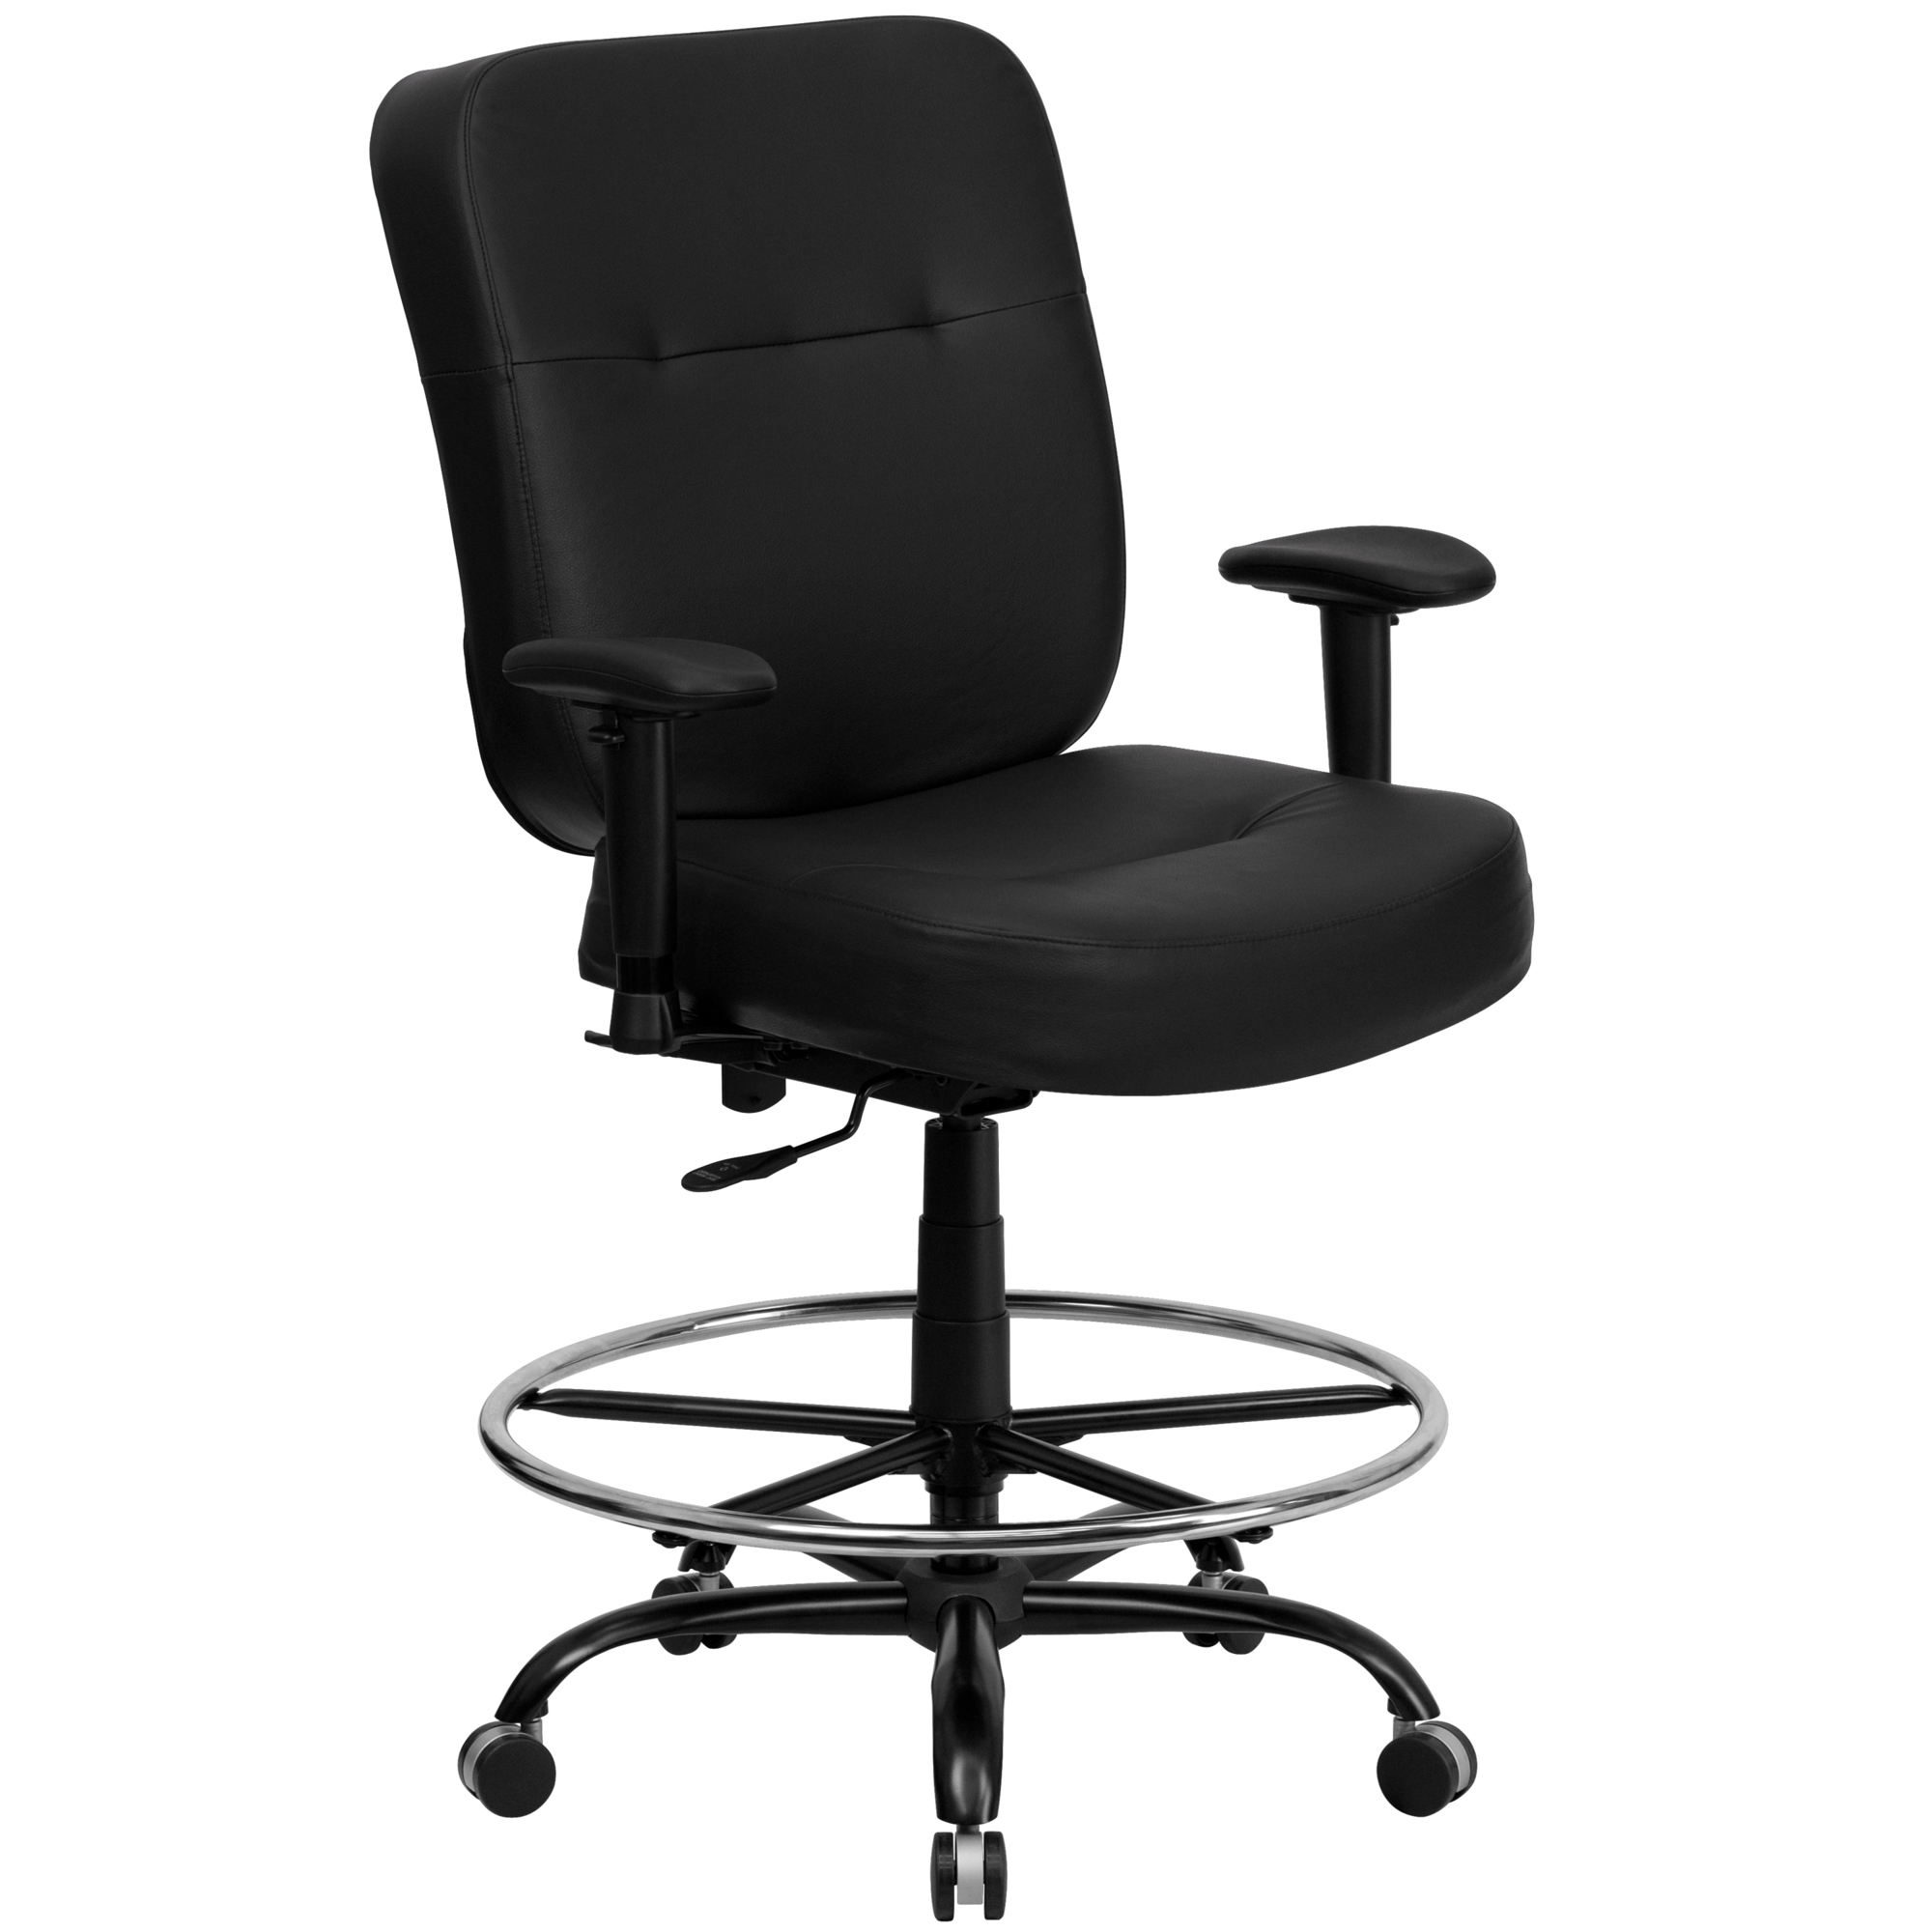 Flash Furniture, 400 lb. Rated Black LeatherSoft Drafting Chair, Primary Color Black, Included (qty.) 1, Model WL735SYGBKLEAAD